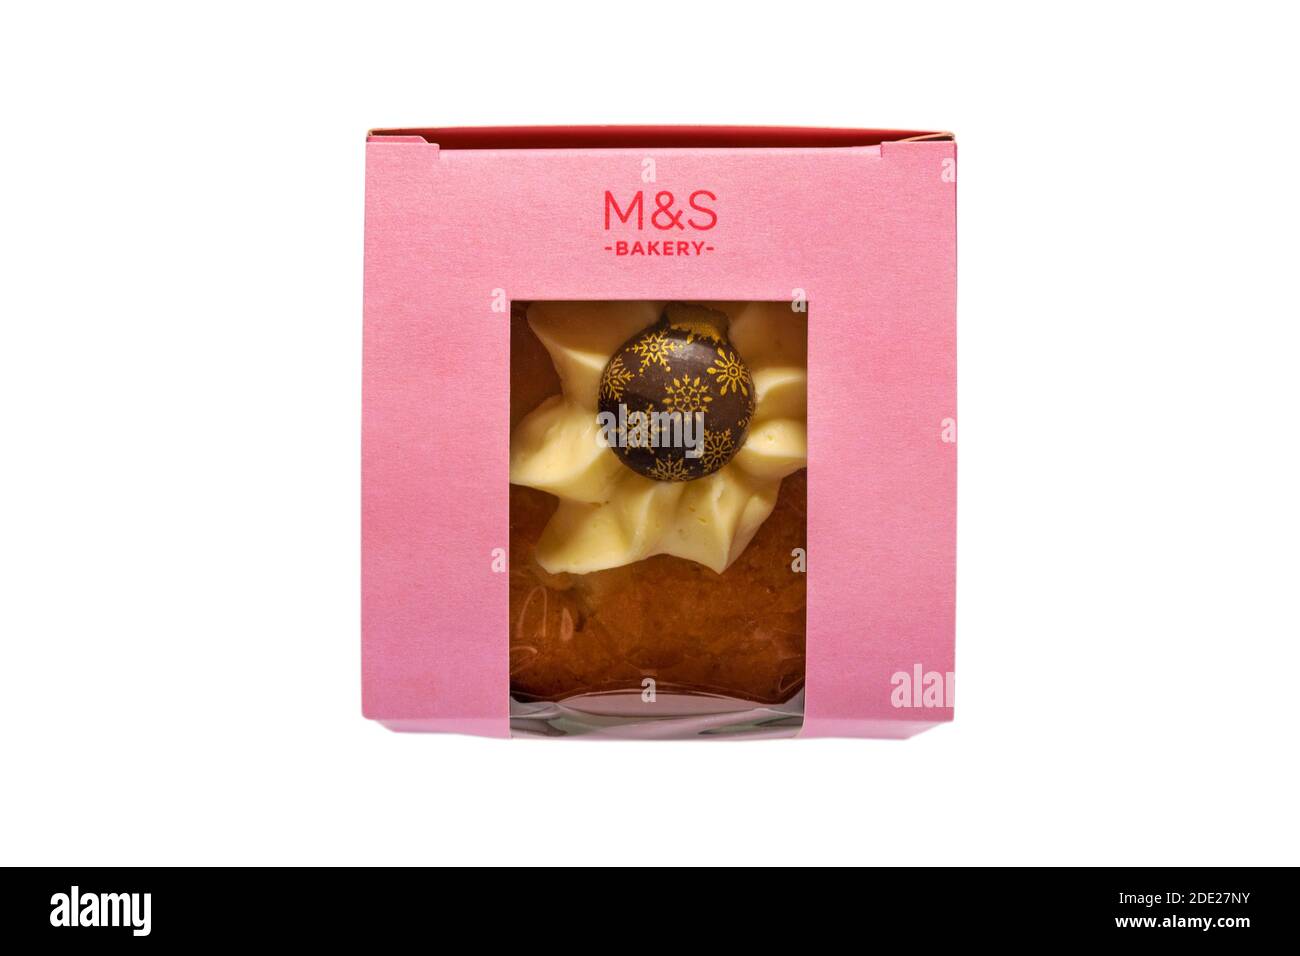 Christmas bauble muffin cake from M&S in-store bakery in box isolated on white background - Bauble Victoria Sponge Muffin Stock Photo